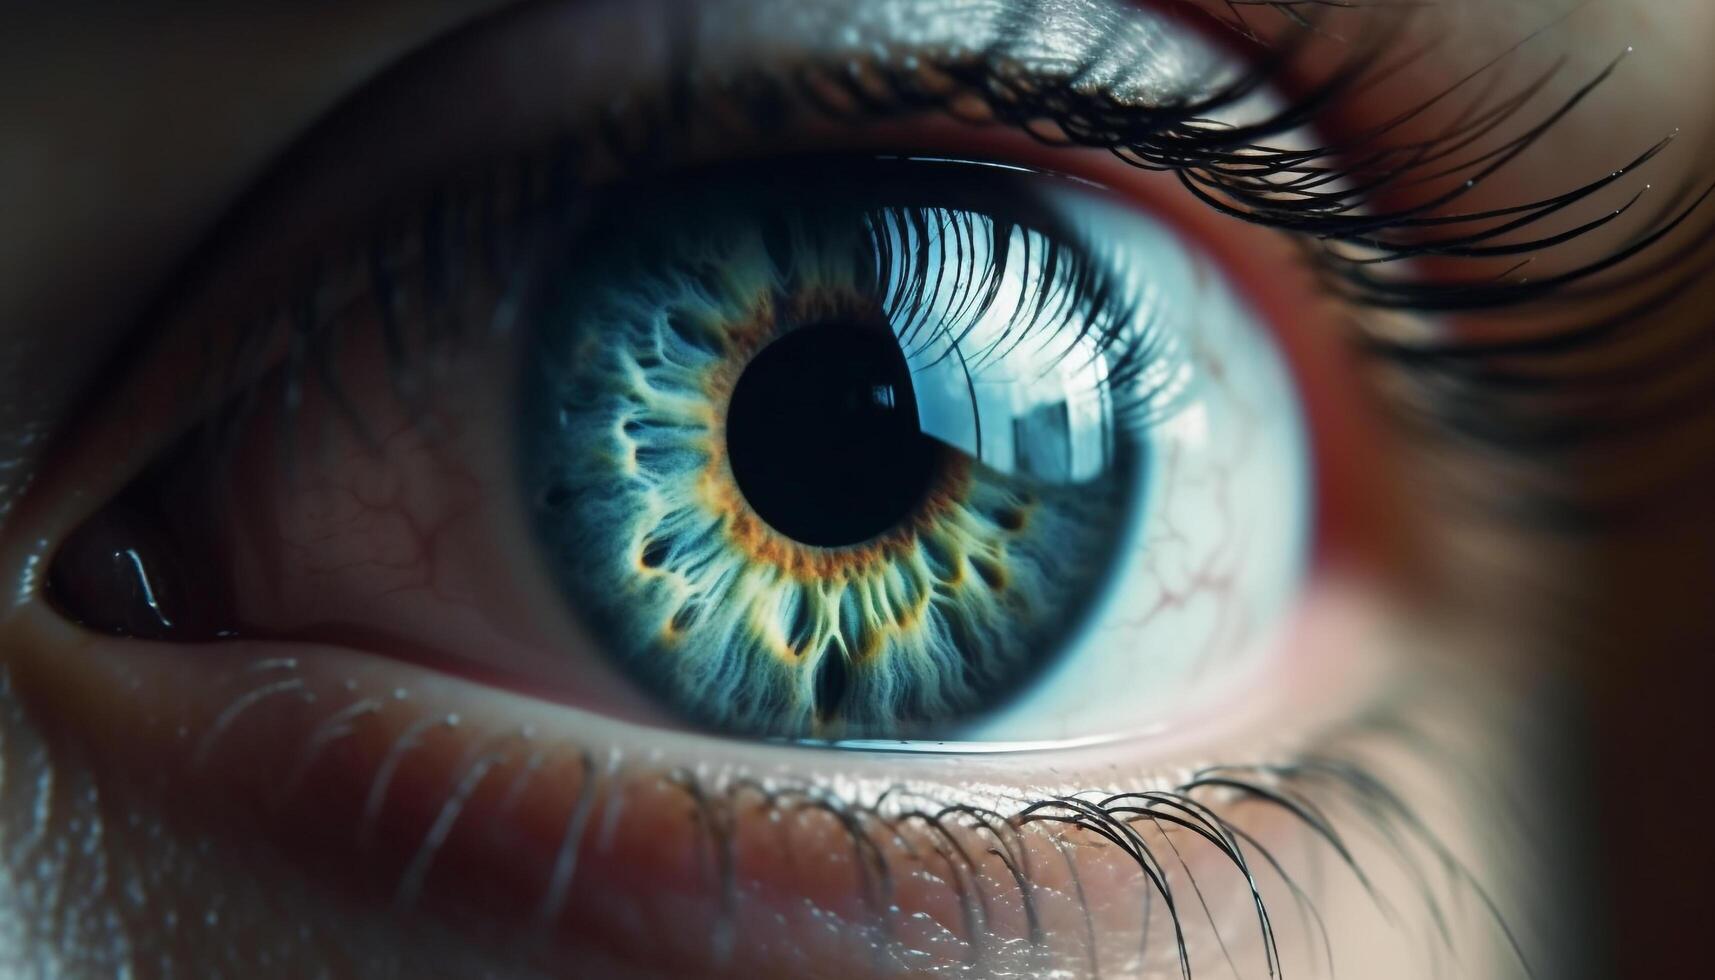 Blue iris staring at camera, eyelashes and eyebrow in focus generated by AI photo